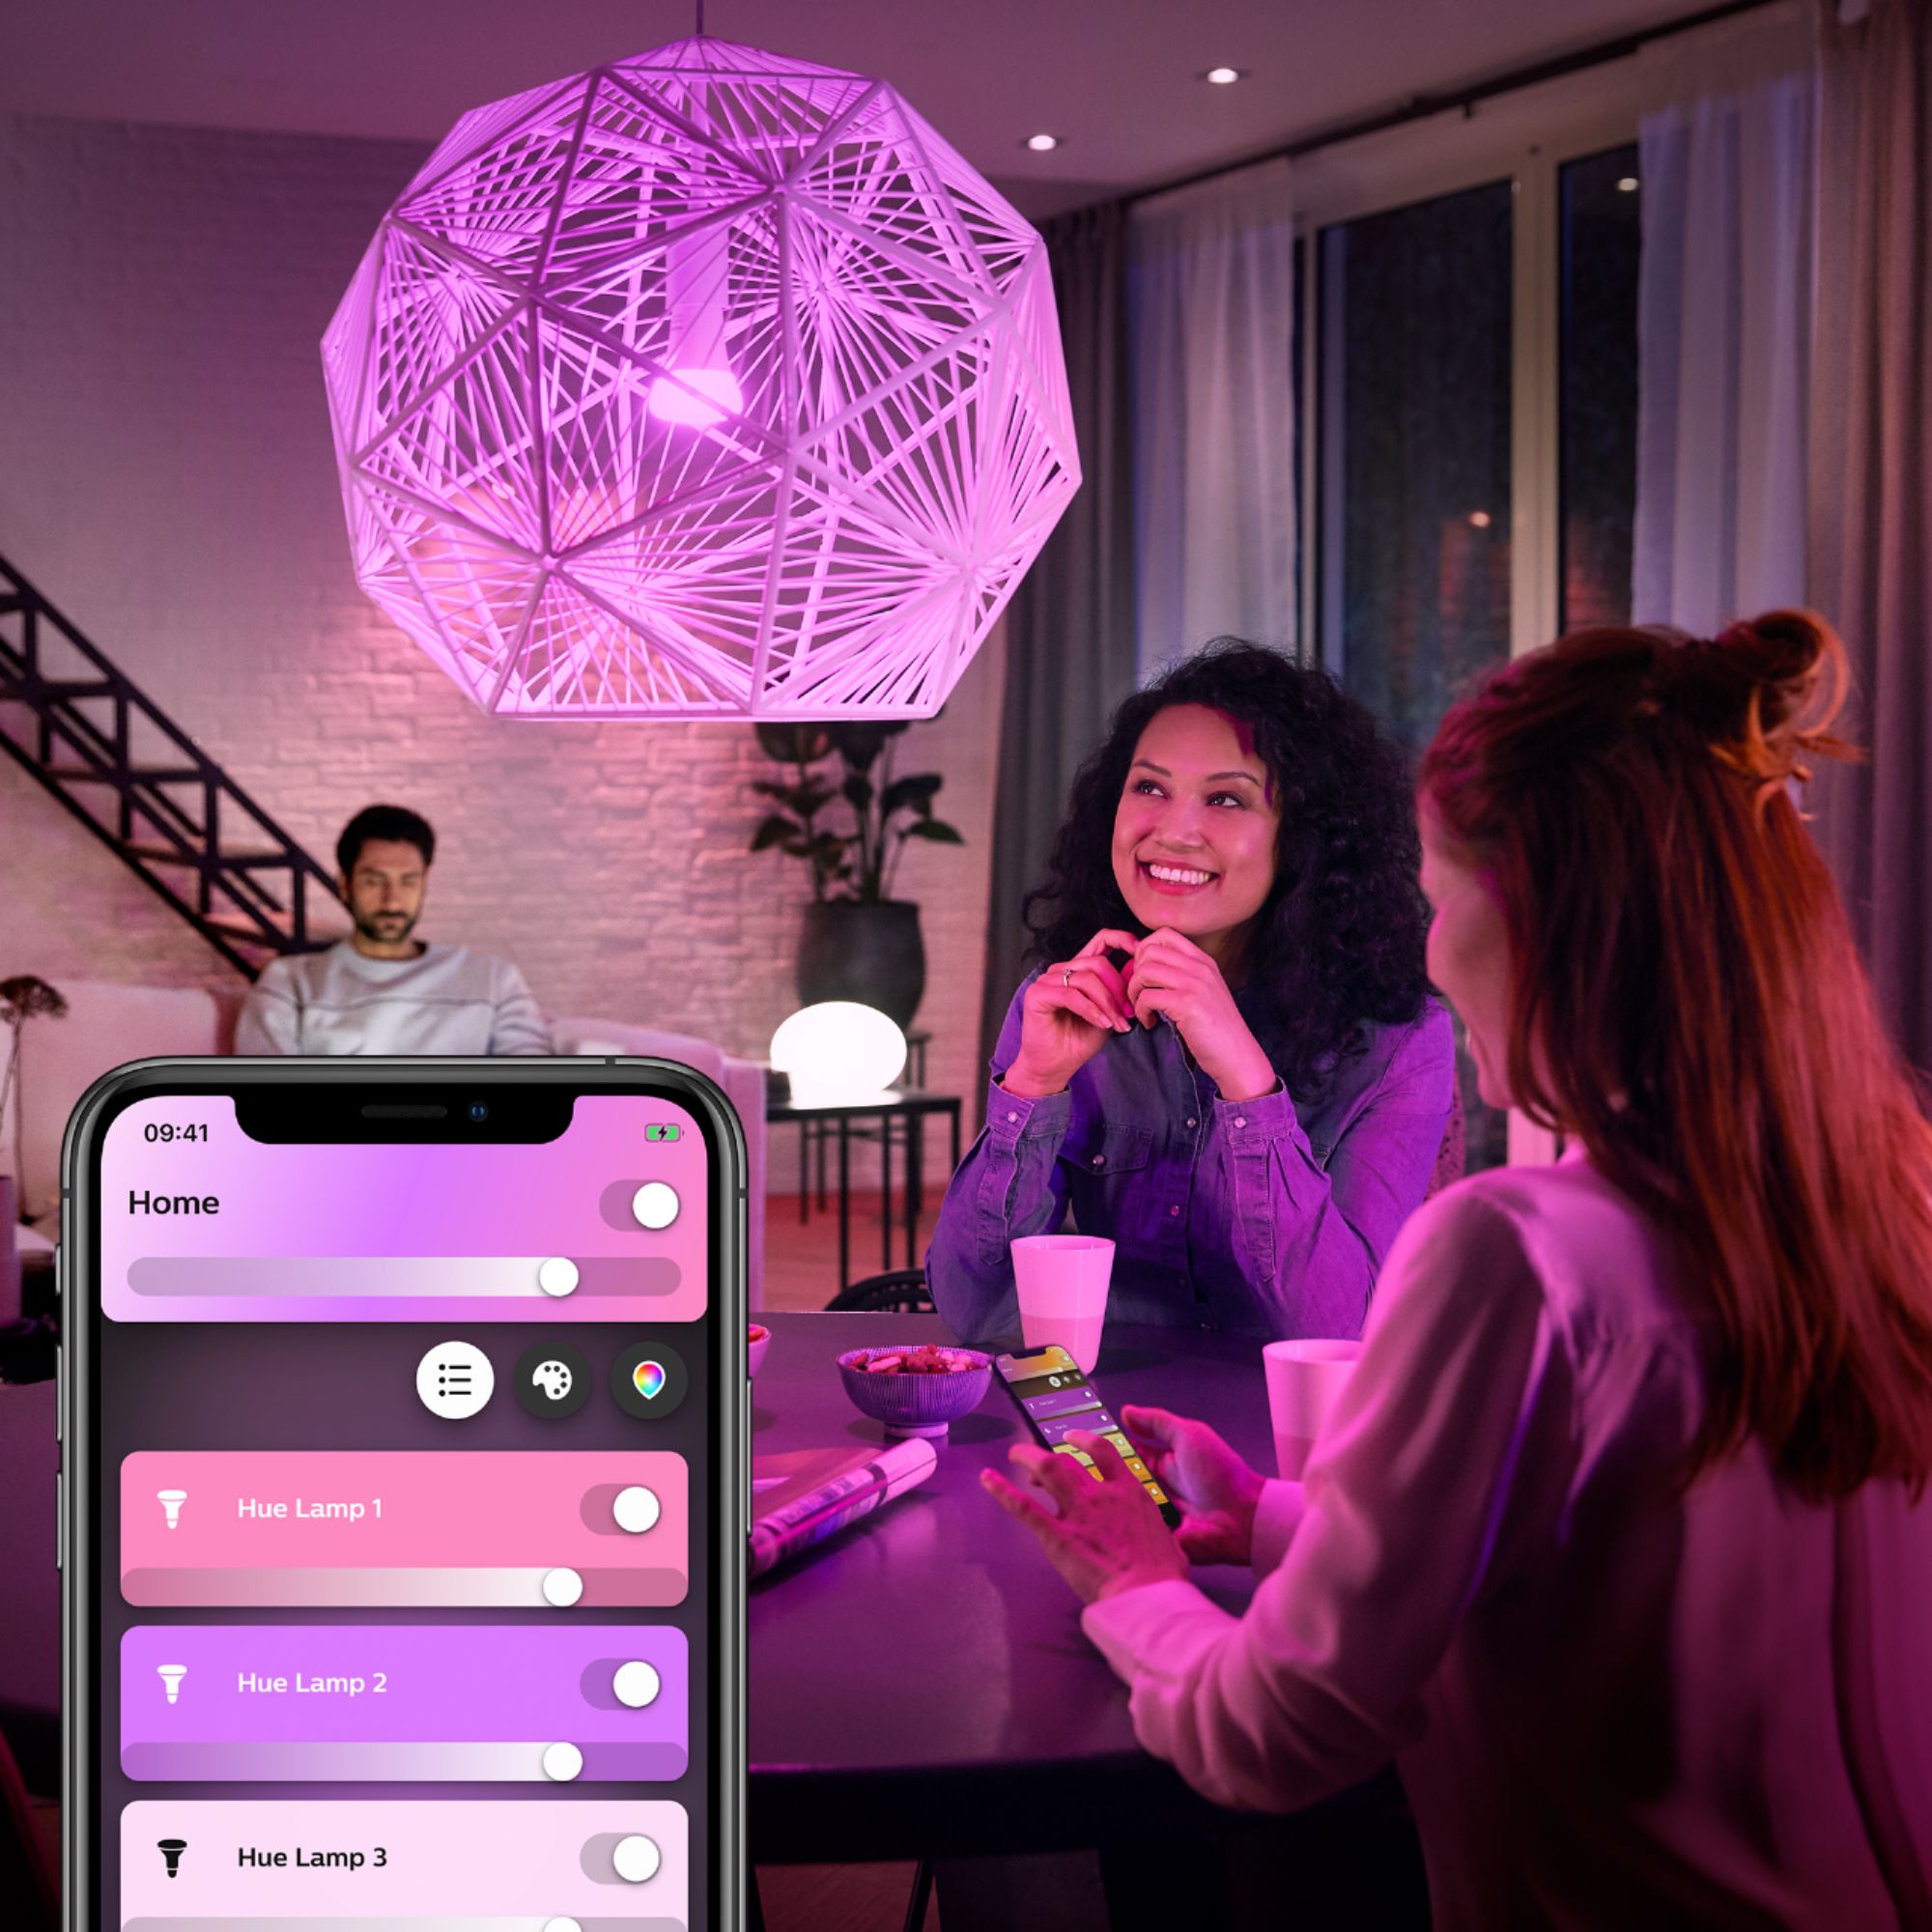 Philips Hue Smart 60W A19 LED Bulb - White and Color Ambiance  Color-Changing Light - 3 Pack - 800LM - E26 - Indoor - Control with Hue App  - Works with